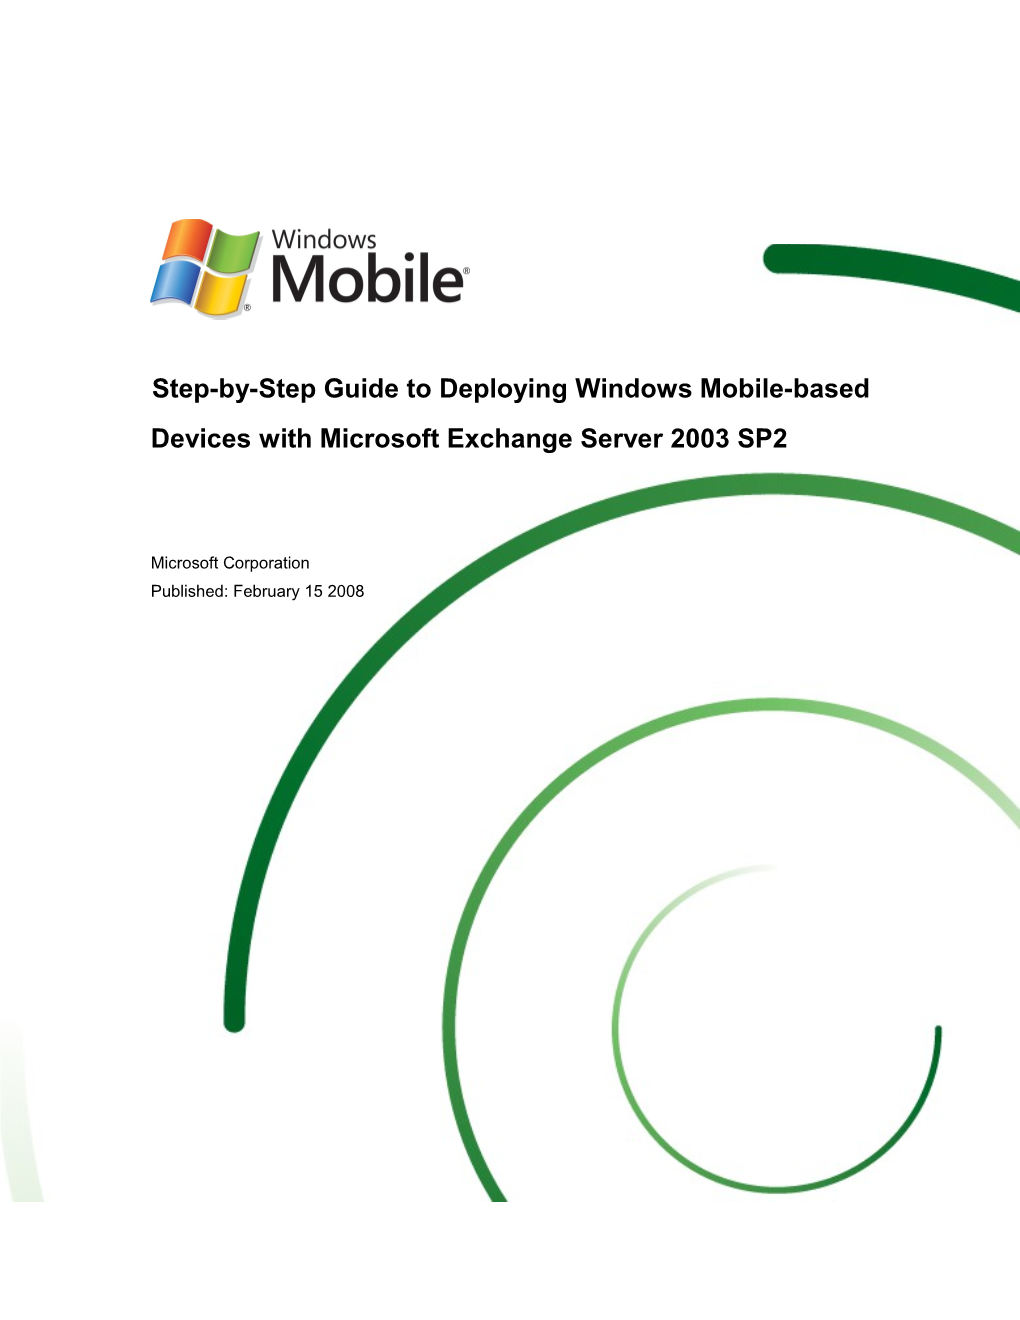 Step-By-Step Guide to Deploying Windows Mobile-Based Devices with Microsoft Exchange Server